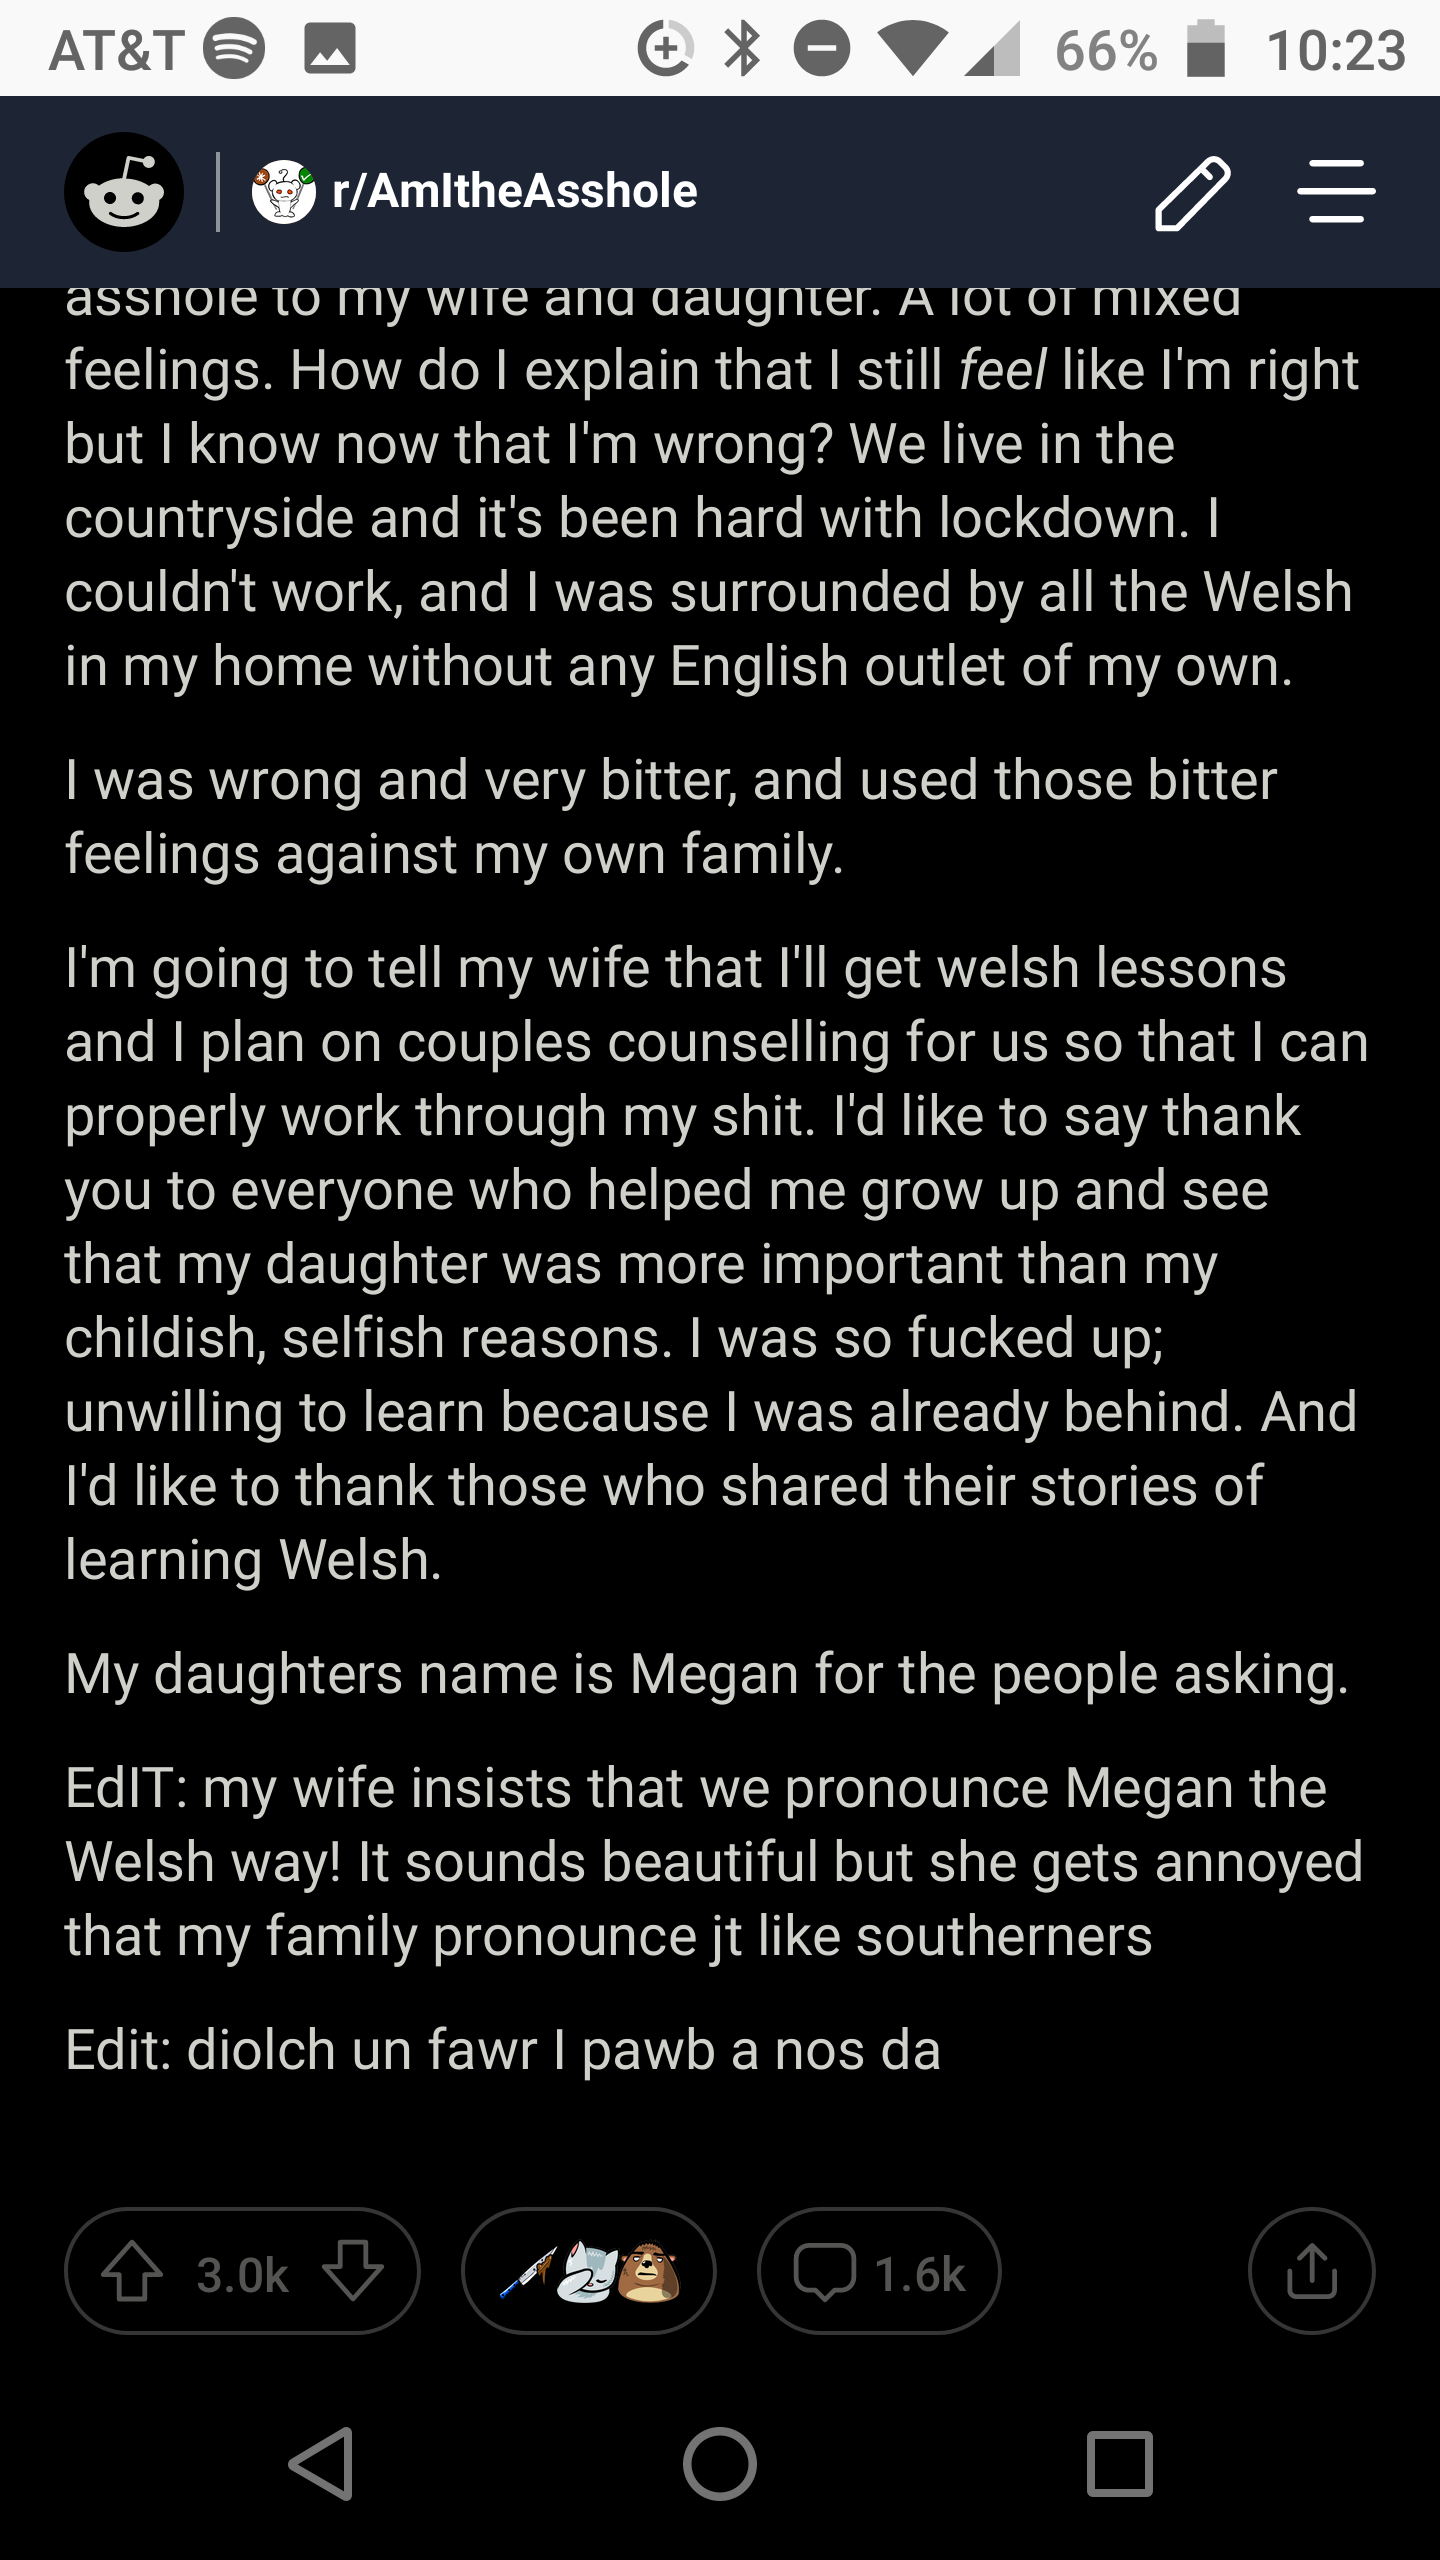 urbanfantasyinspiration:celtic-pyro:cutthroatchorus:female-twink-deactivated2021032:queerautism:queerautism:On the topic of English people being shitheads towards Welsh people - This fucking dude today on AITAYeah pretty sure we’re all hoping for